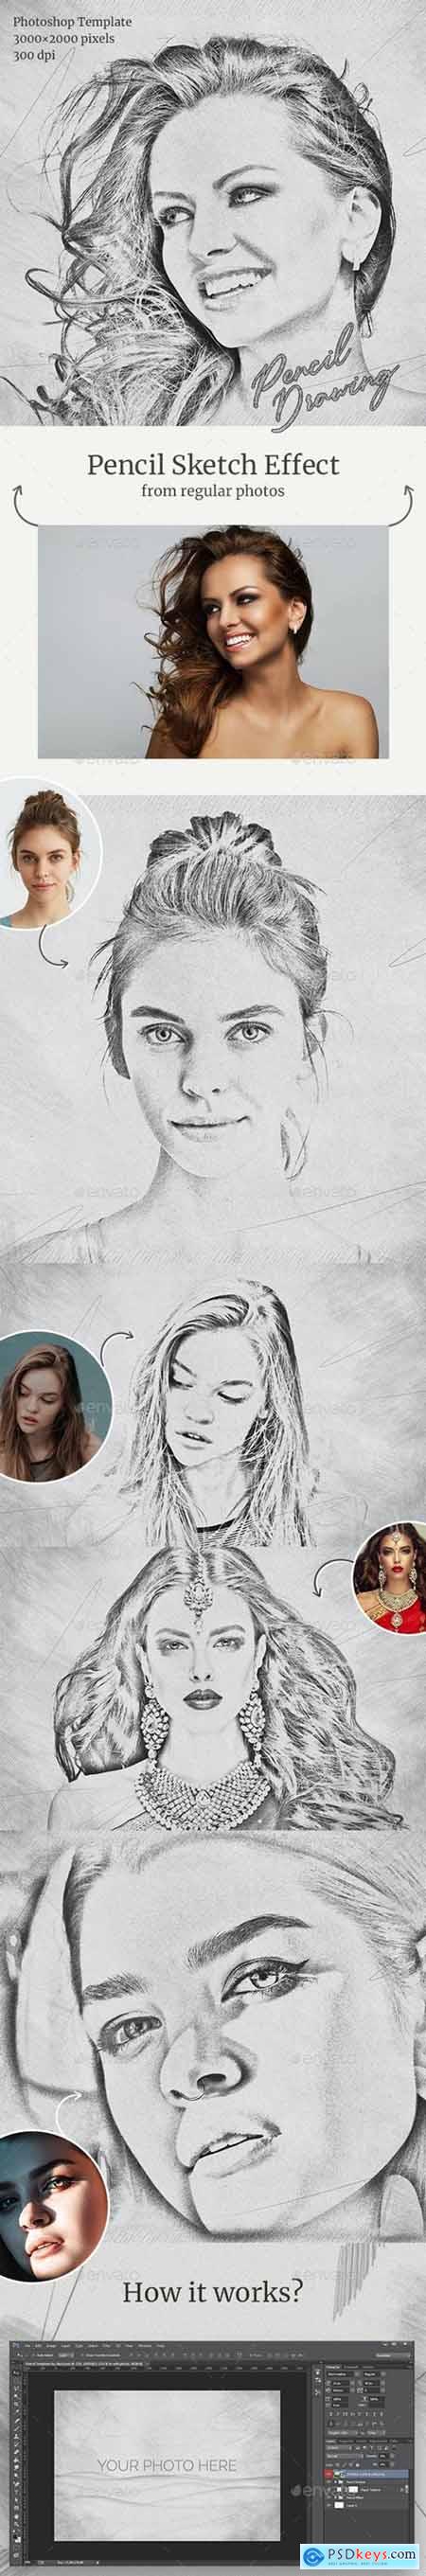 Pencil Drawing Photoshop Template 28663627